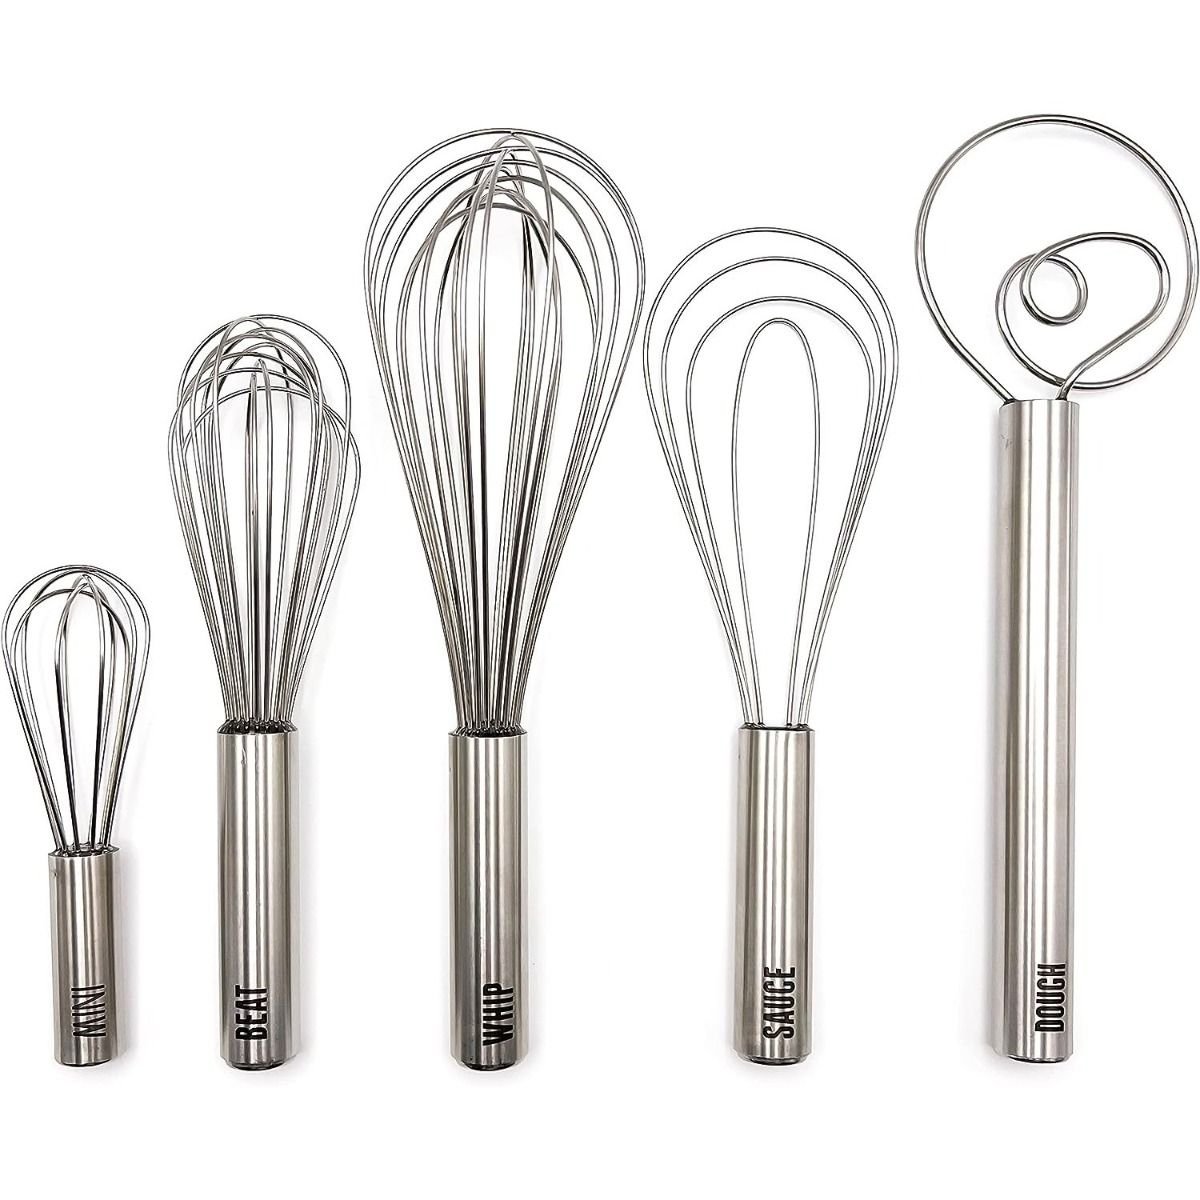 Tovolo 9 Whip Whisk